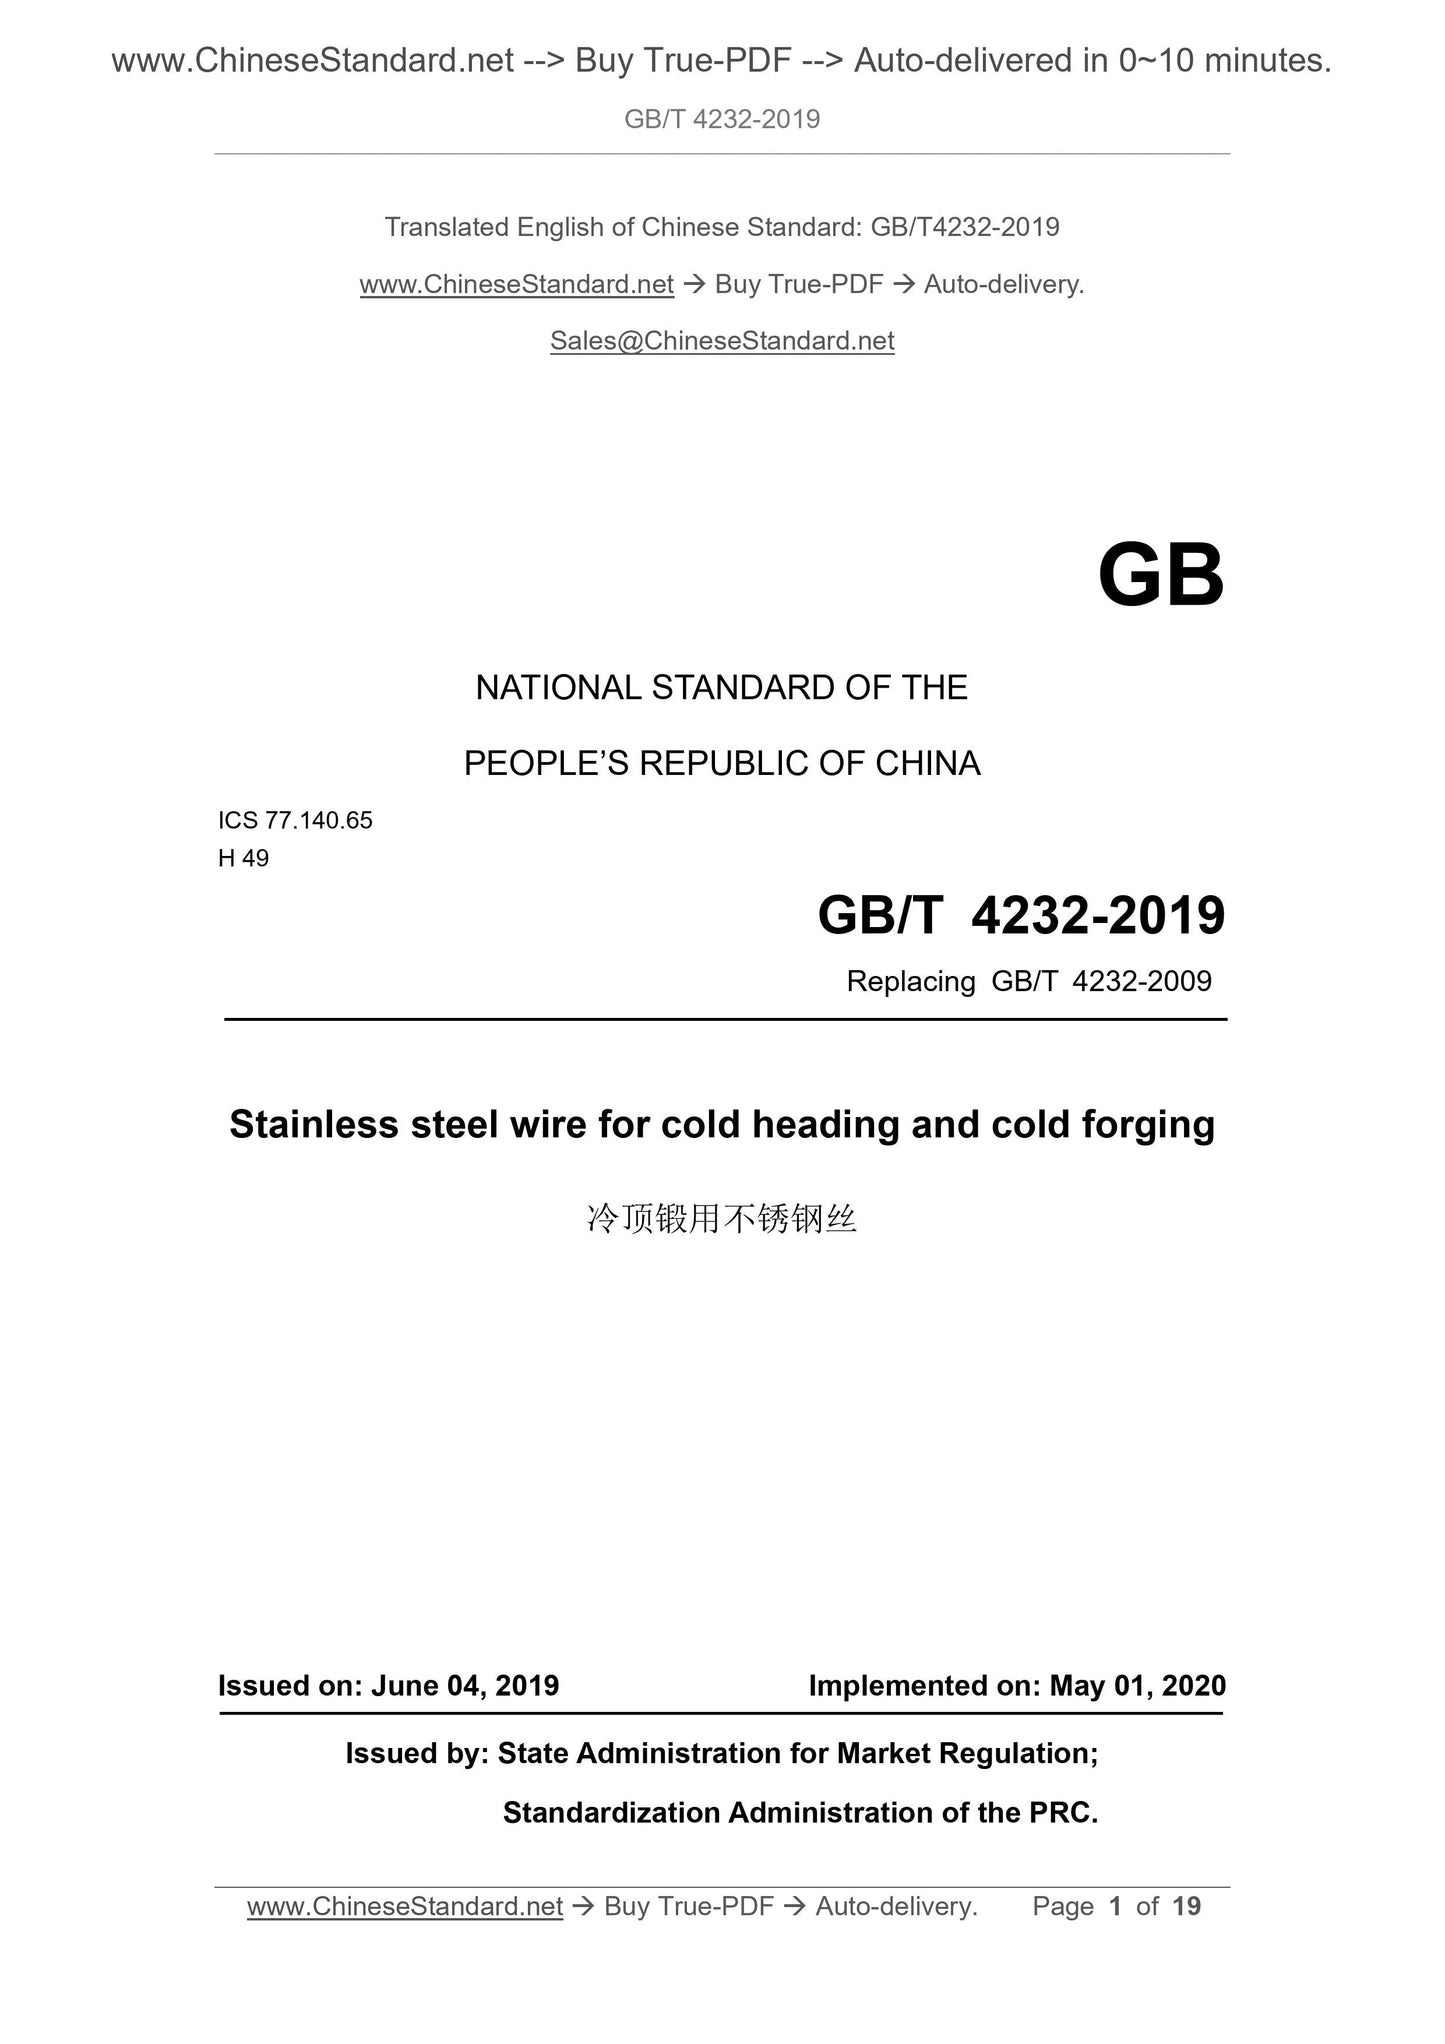 GB/T 4232-2019 Page 1